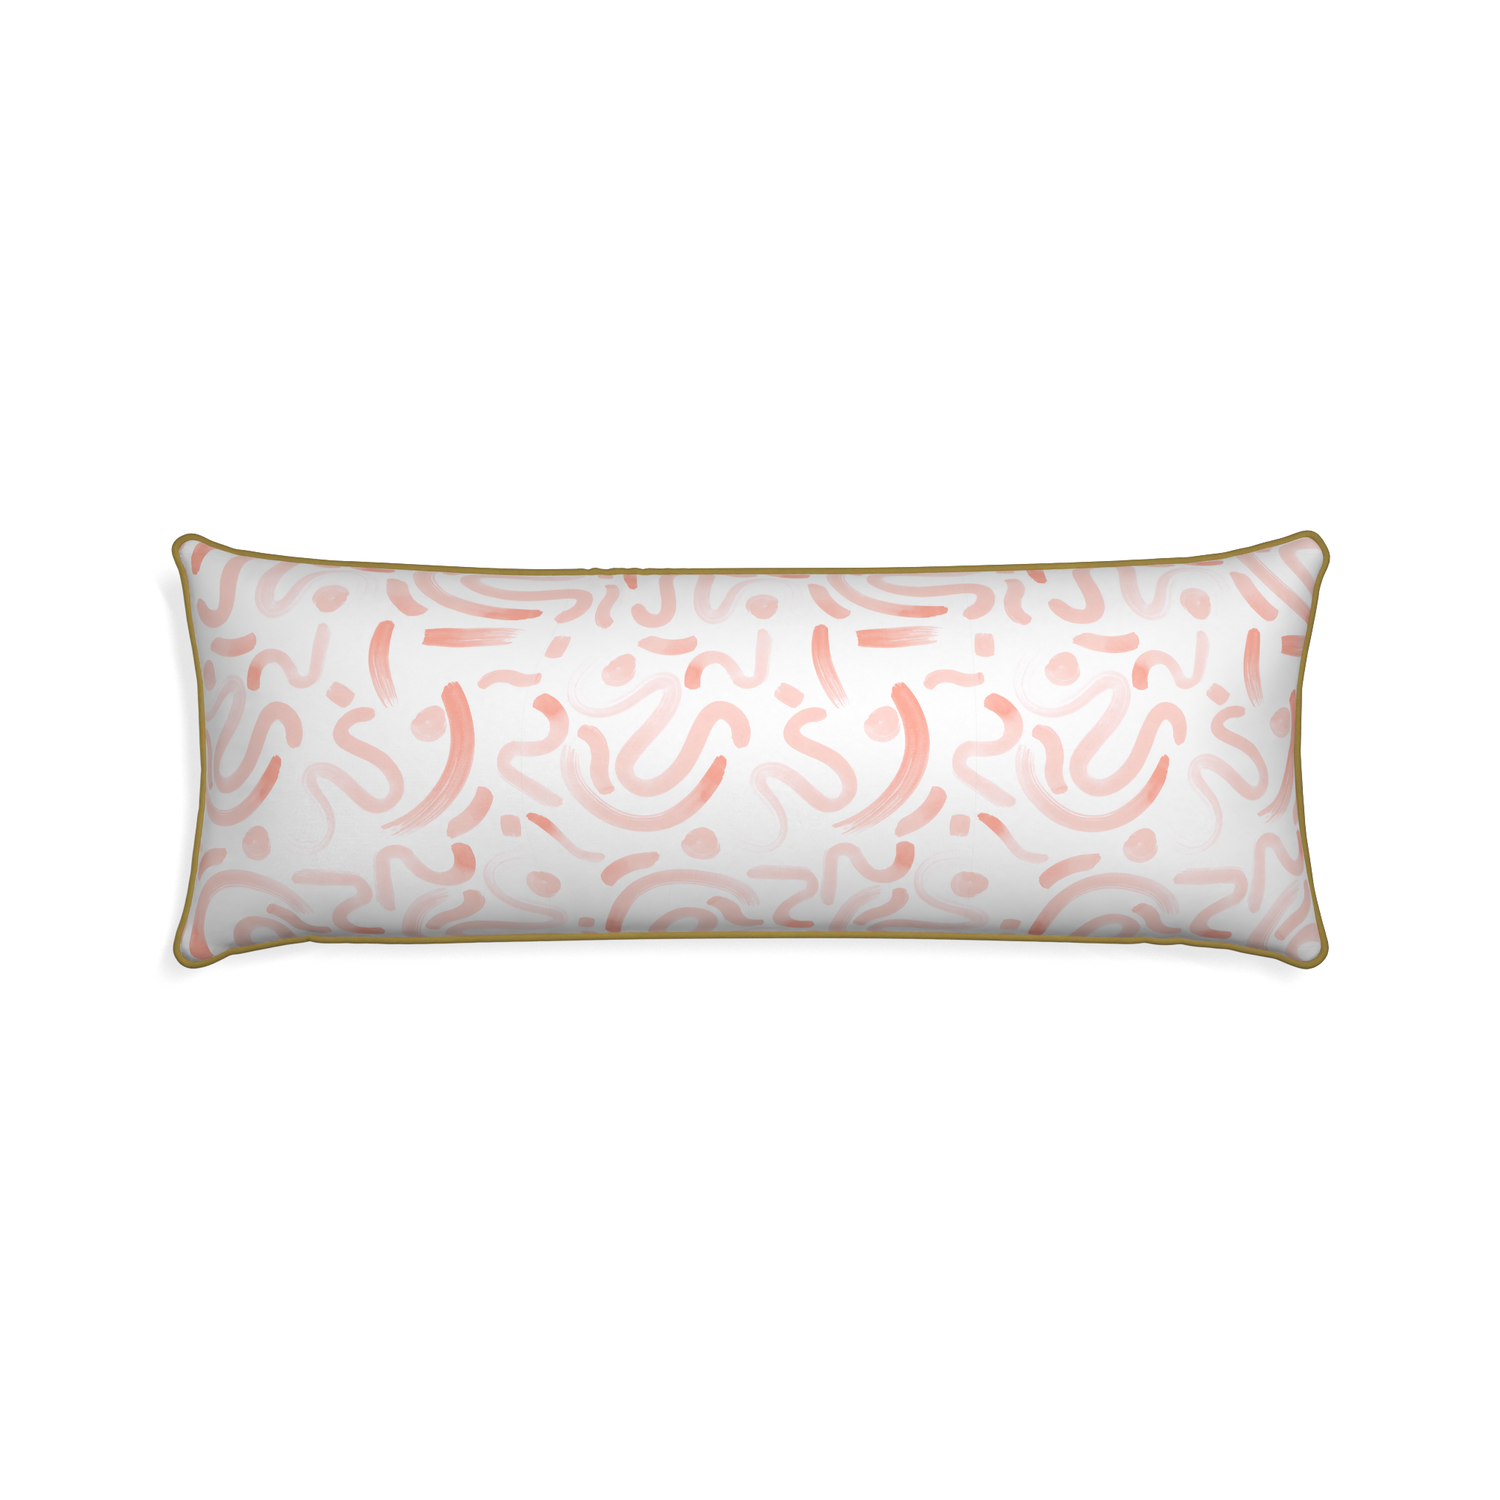 Xl-lumbar hockney pink custom pink graphicpillow with c piping on white background